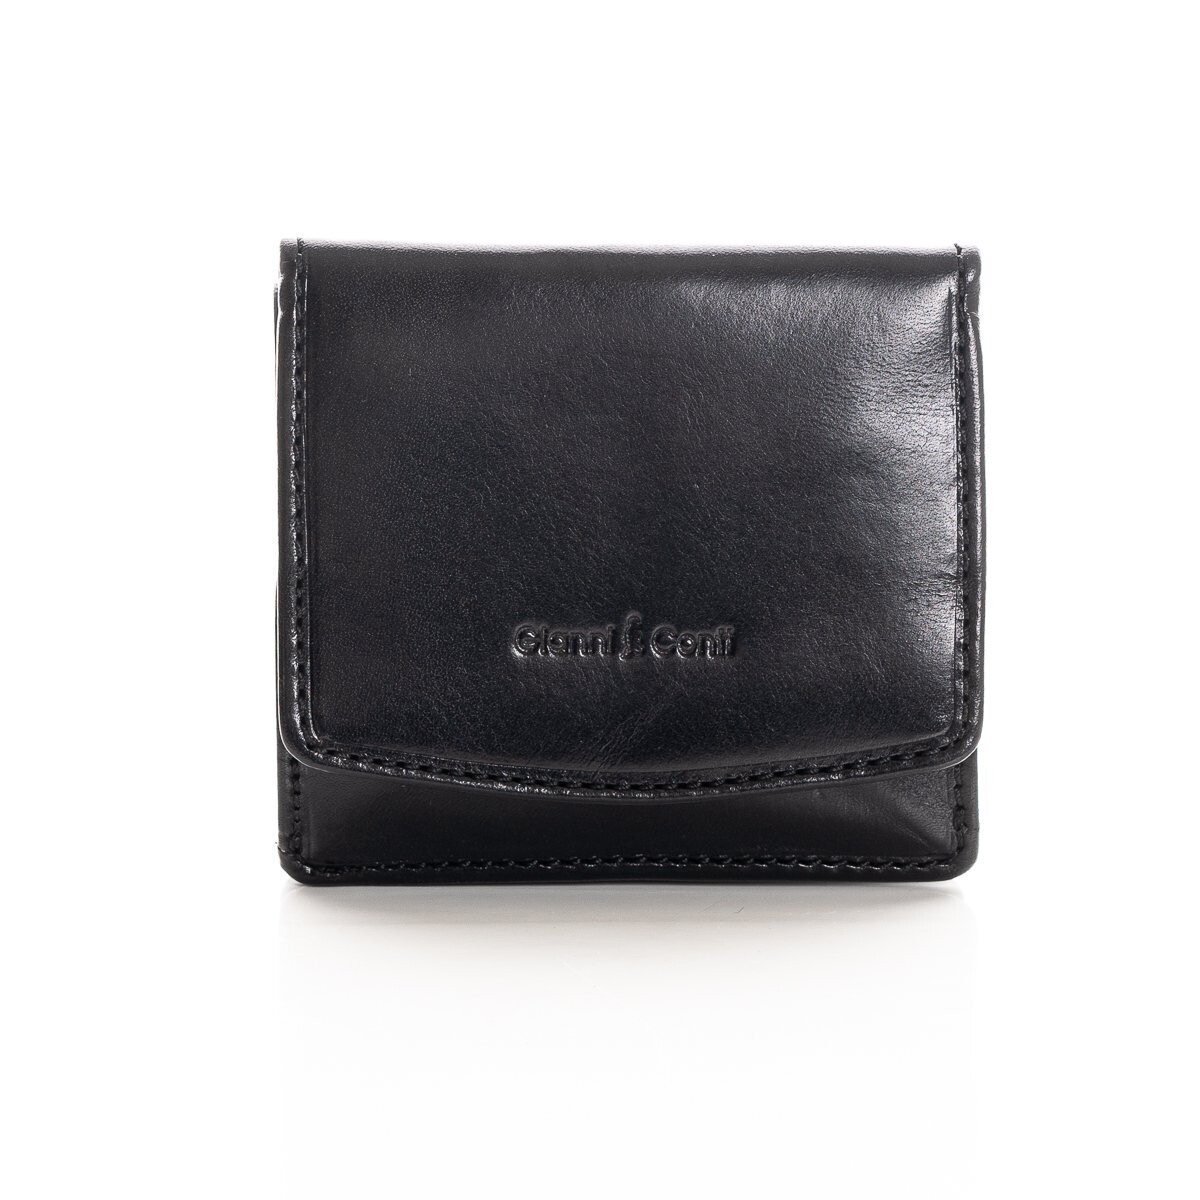 Gianni Conti Wallet with Tray Coin Purse